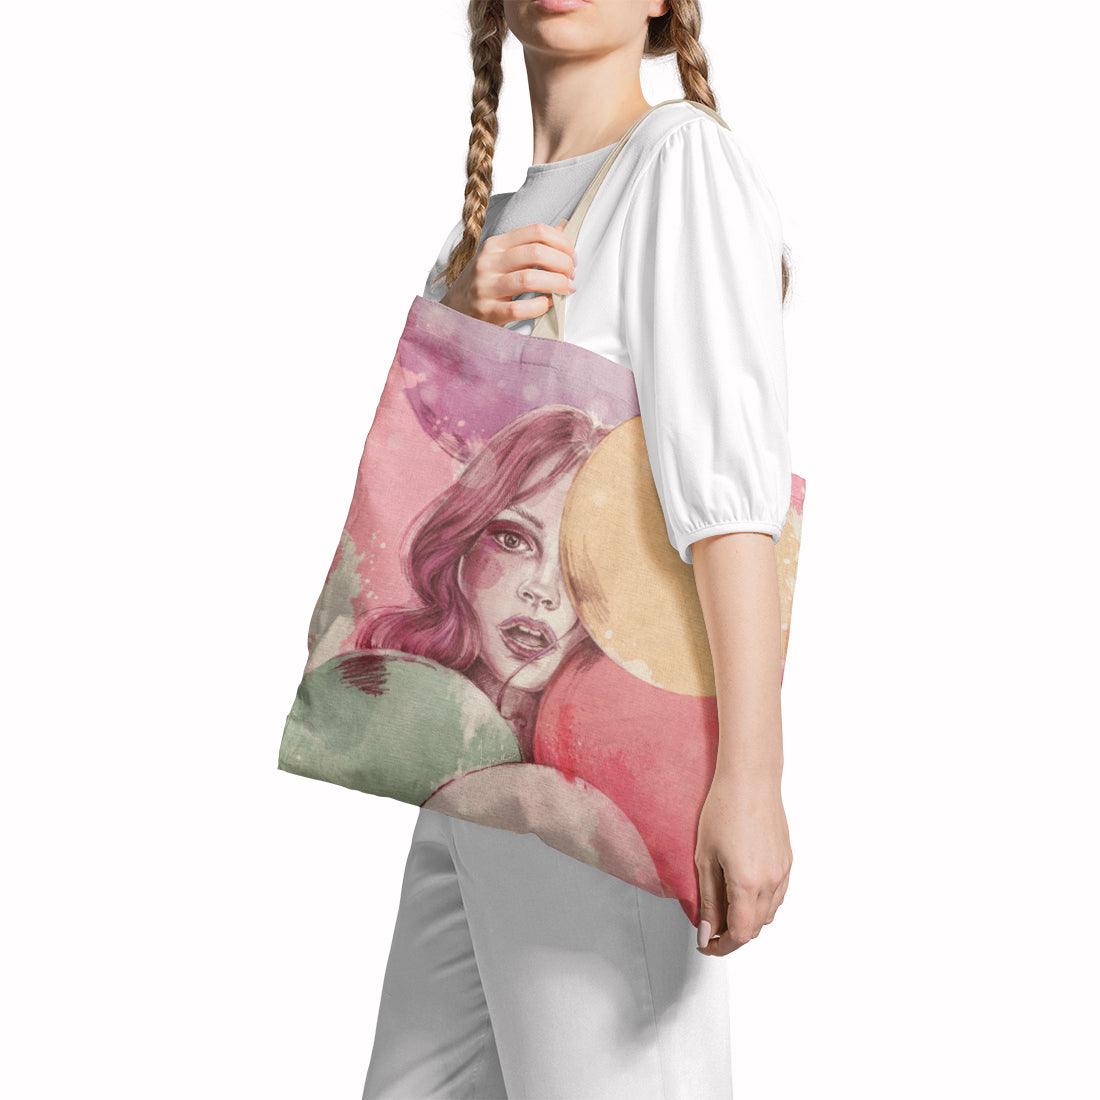 Tote Bag Belle of the ball